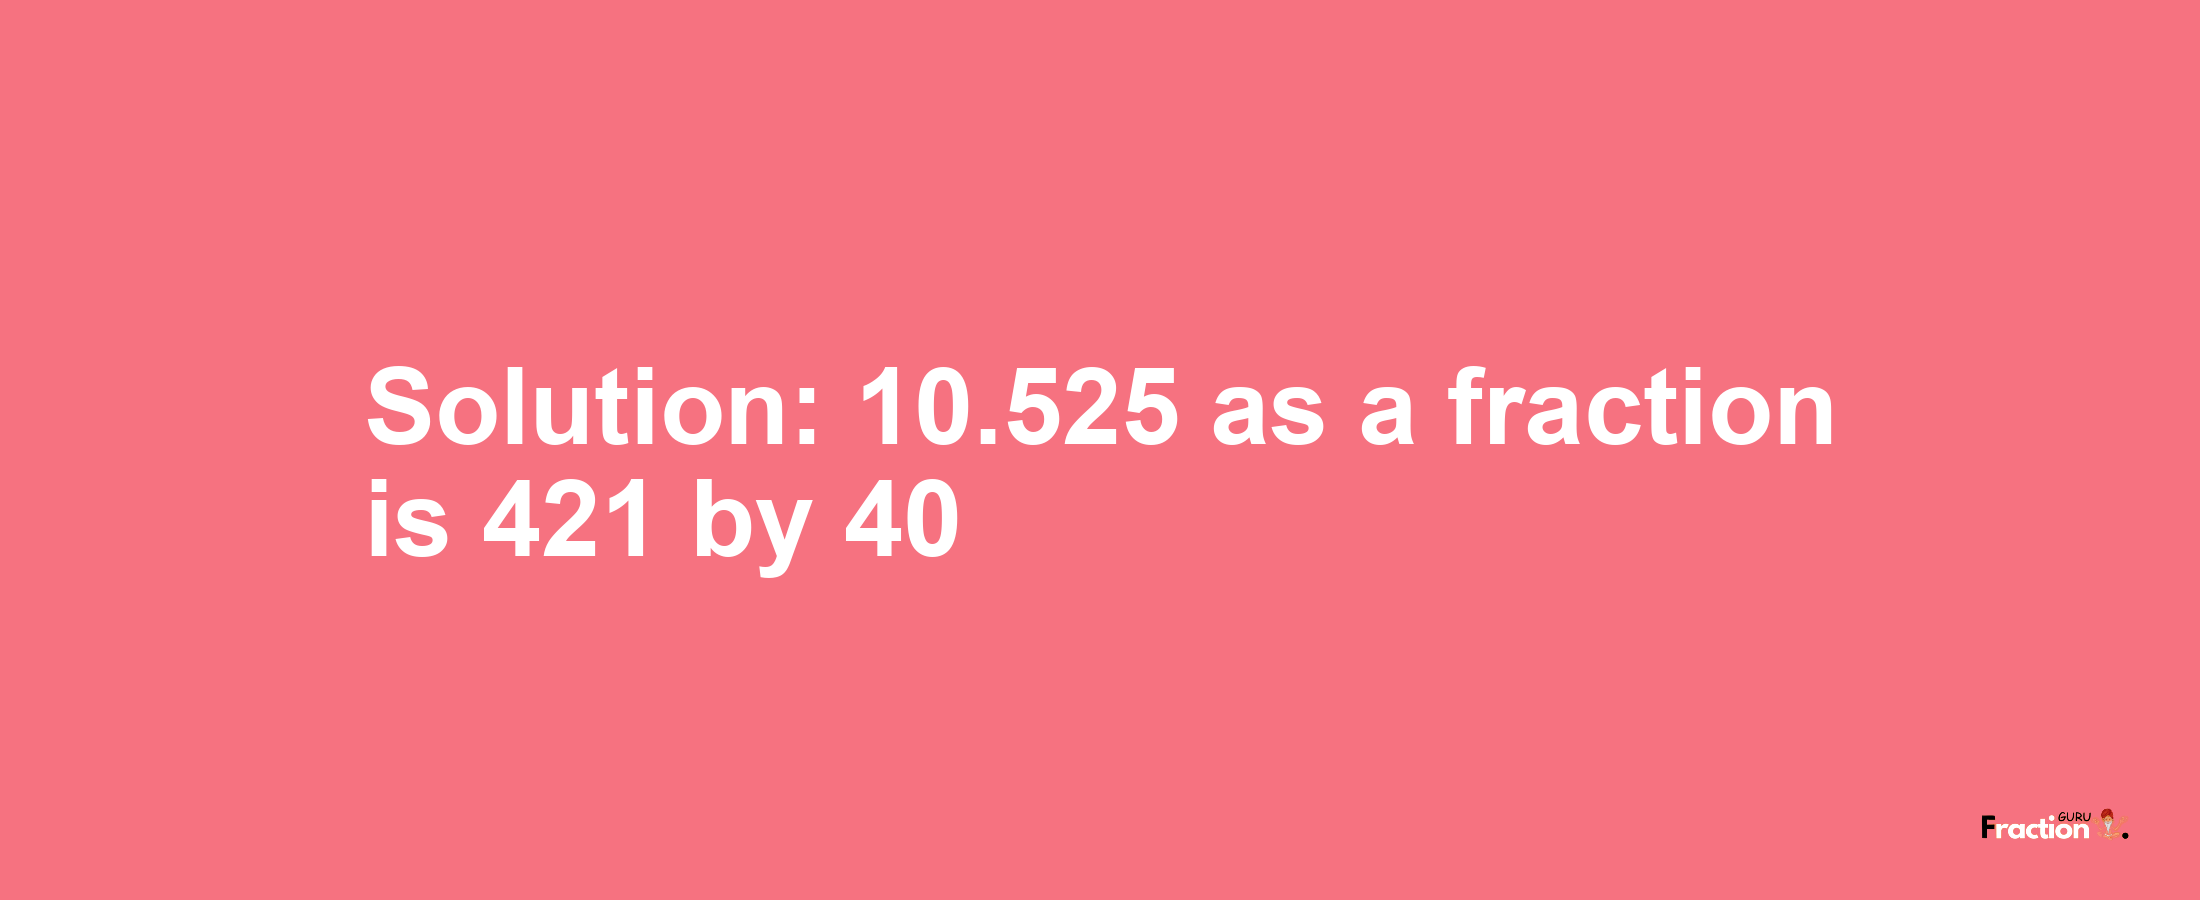 Solution:10.525 as a fraction is 421/40